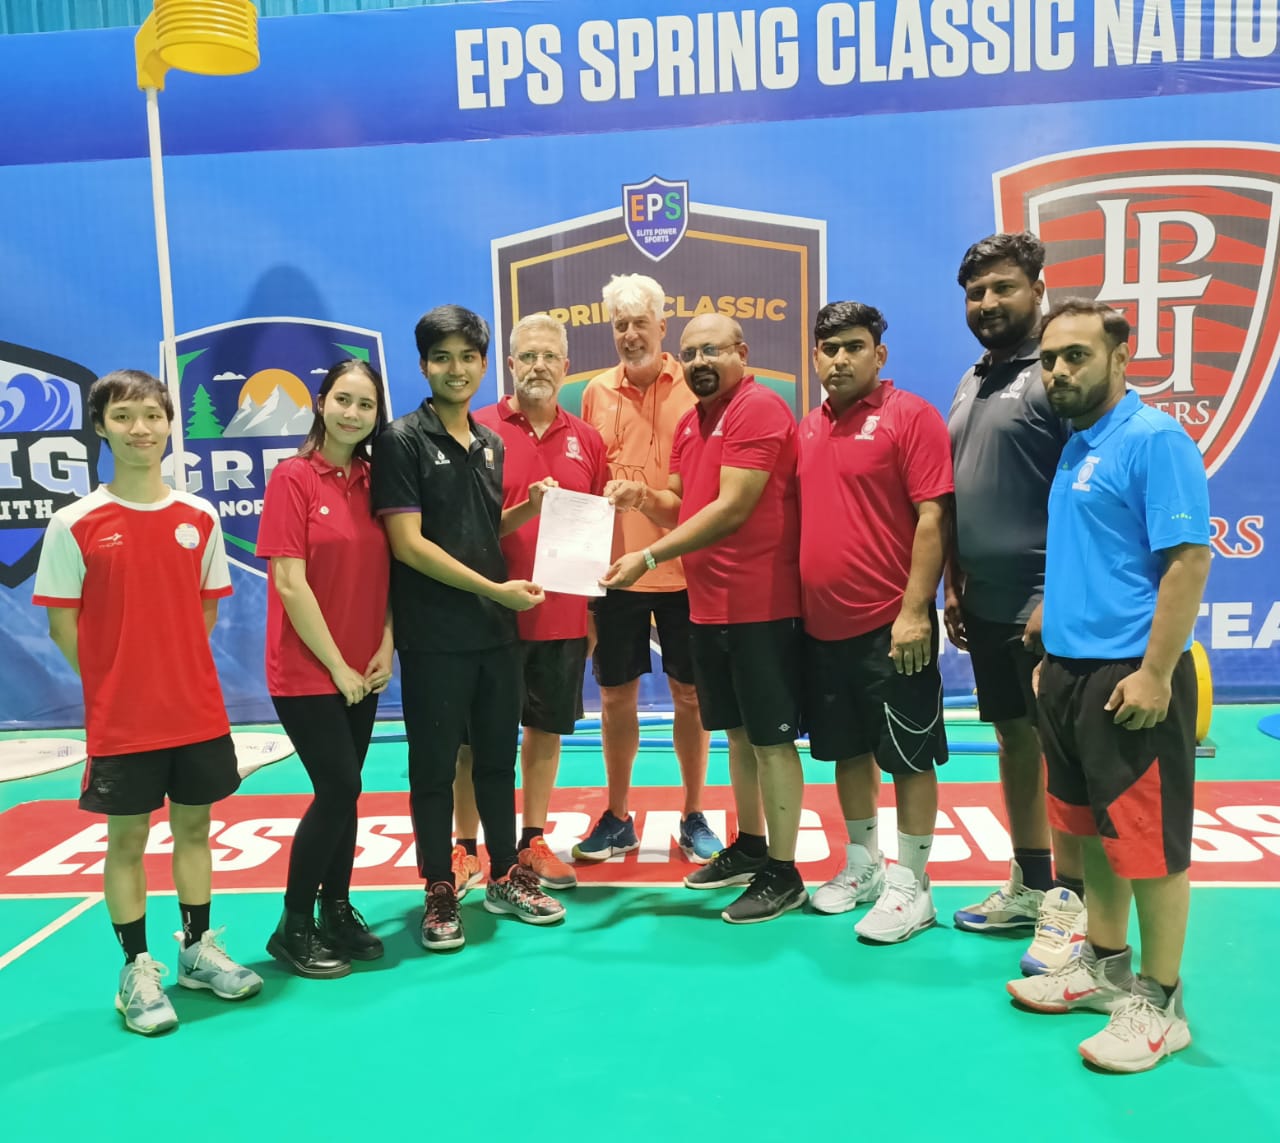 T.C.College, Dept. of Sports Signed MoU with Philippines Korfball Federation